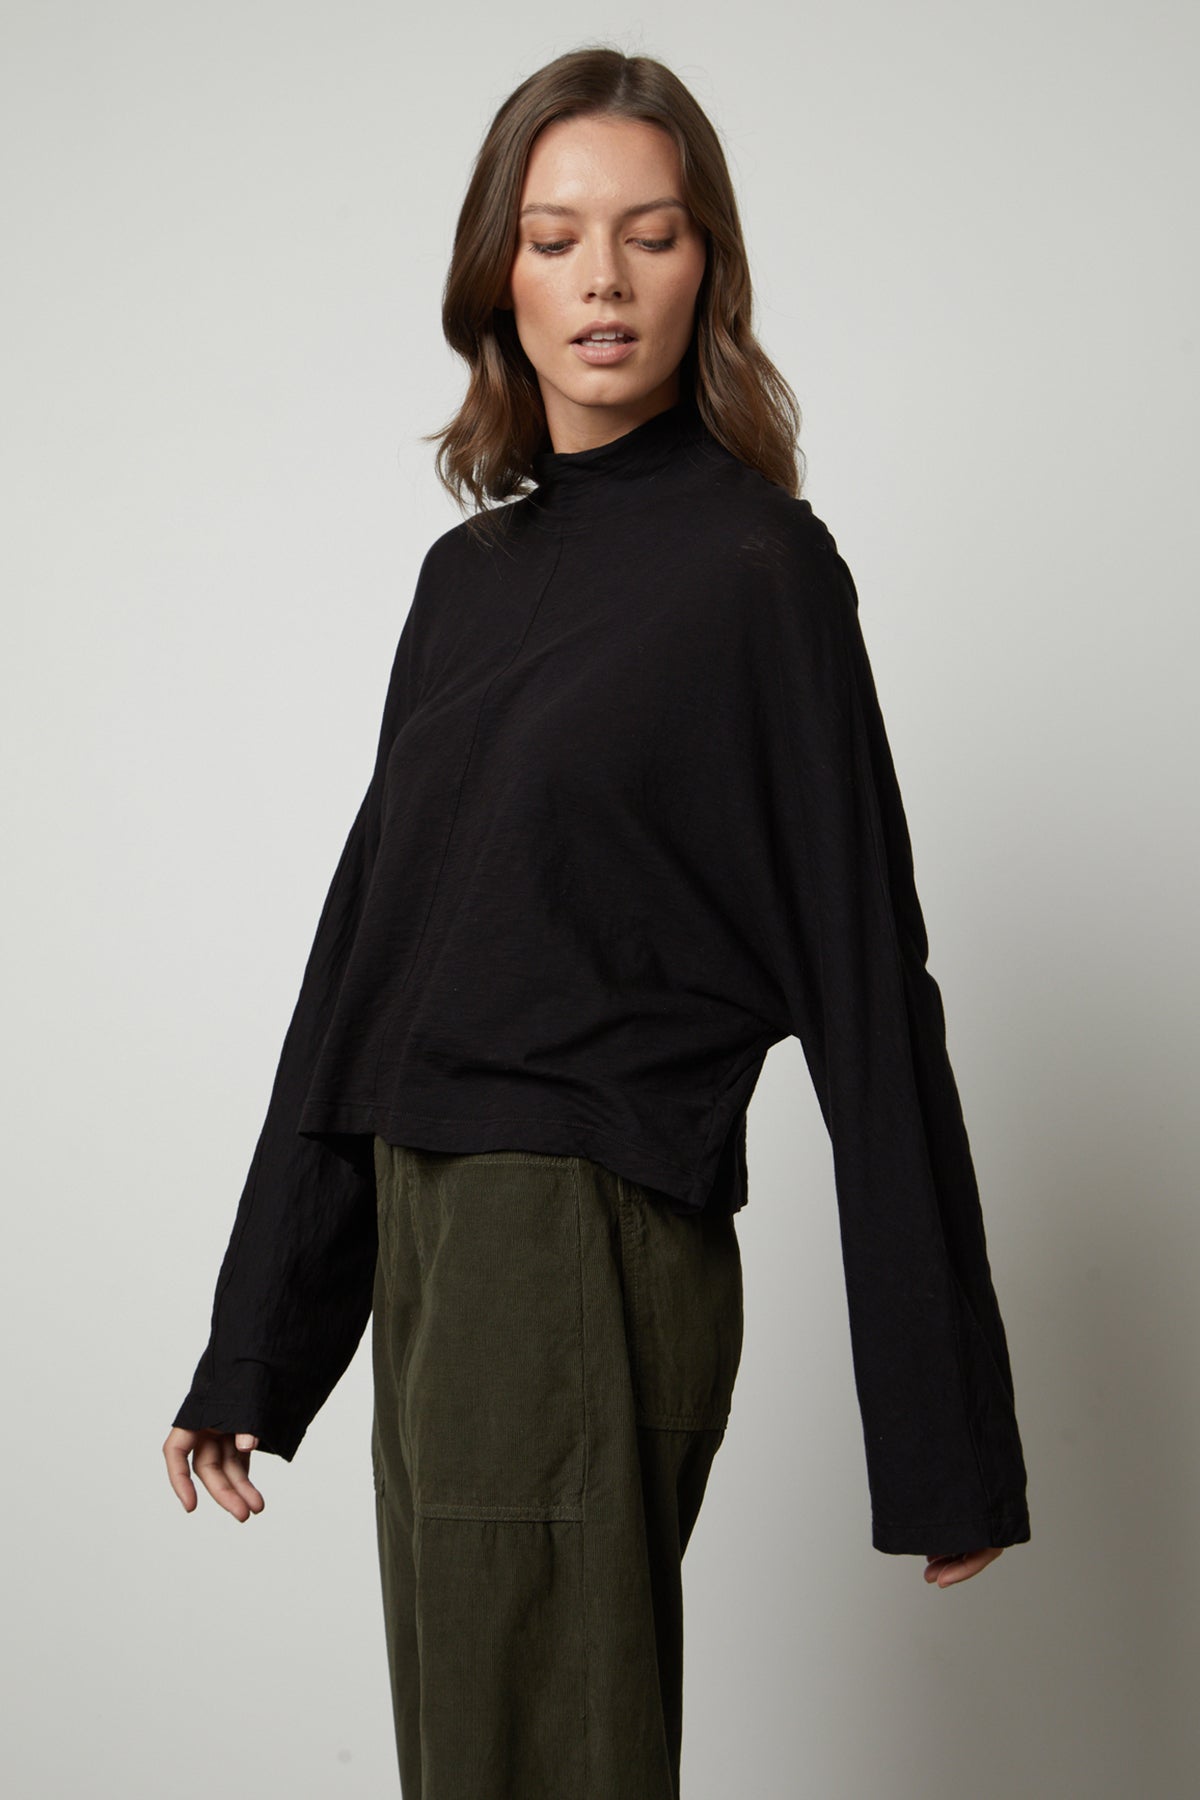 The model is wearing a Velvet by Graham & Spencer STACEY MOCK NECK TEE and green trousers.-26895469347009